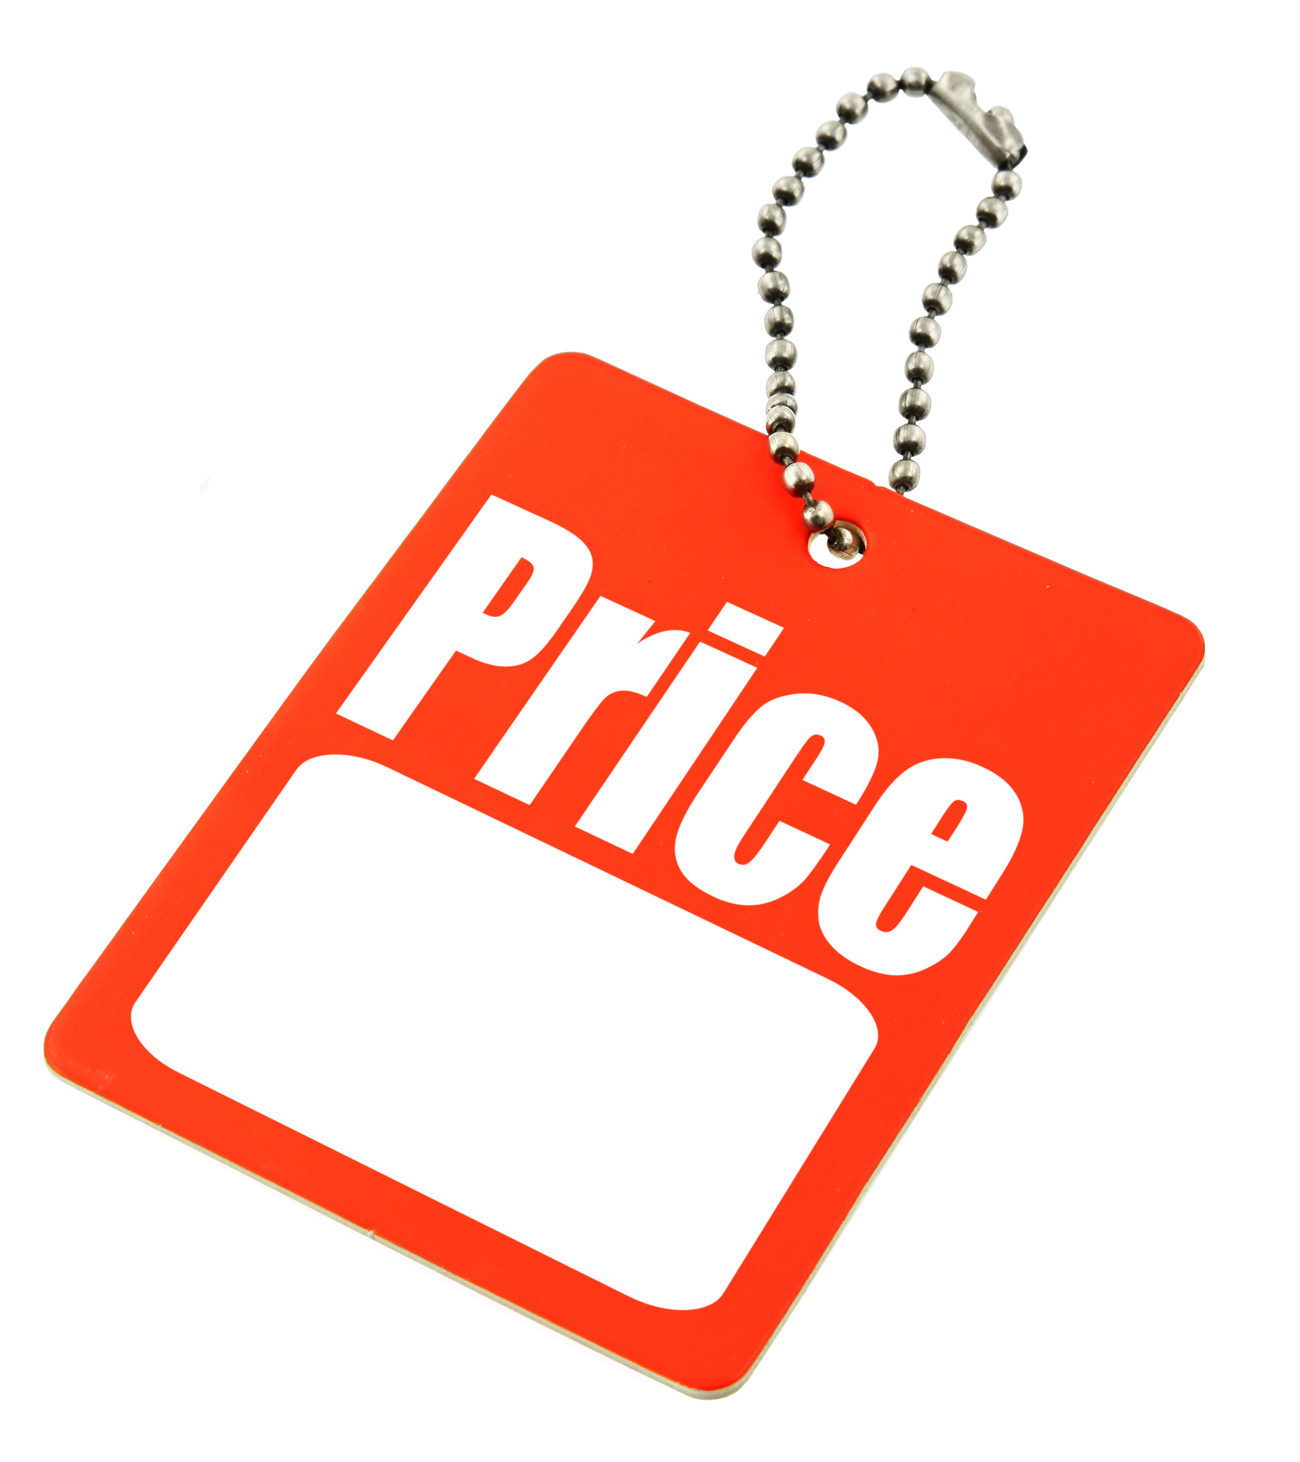 Free Price Tag Images, Download Free Clip Art, Free Clip Art.